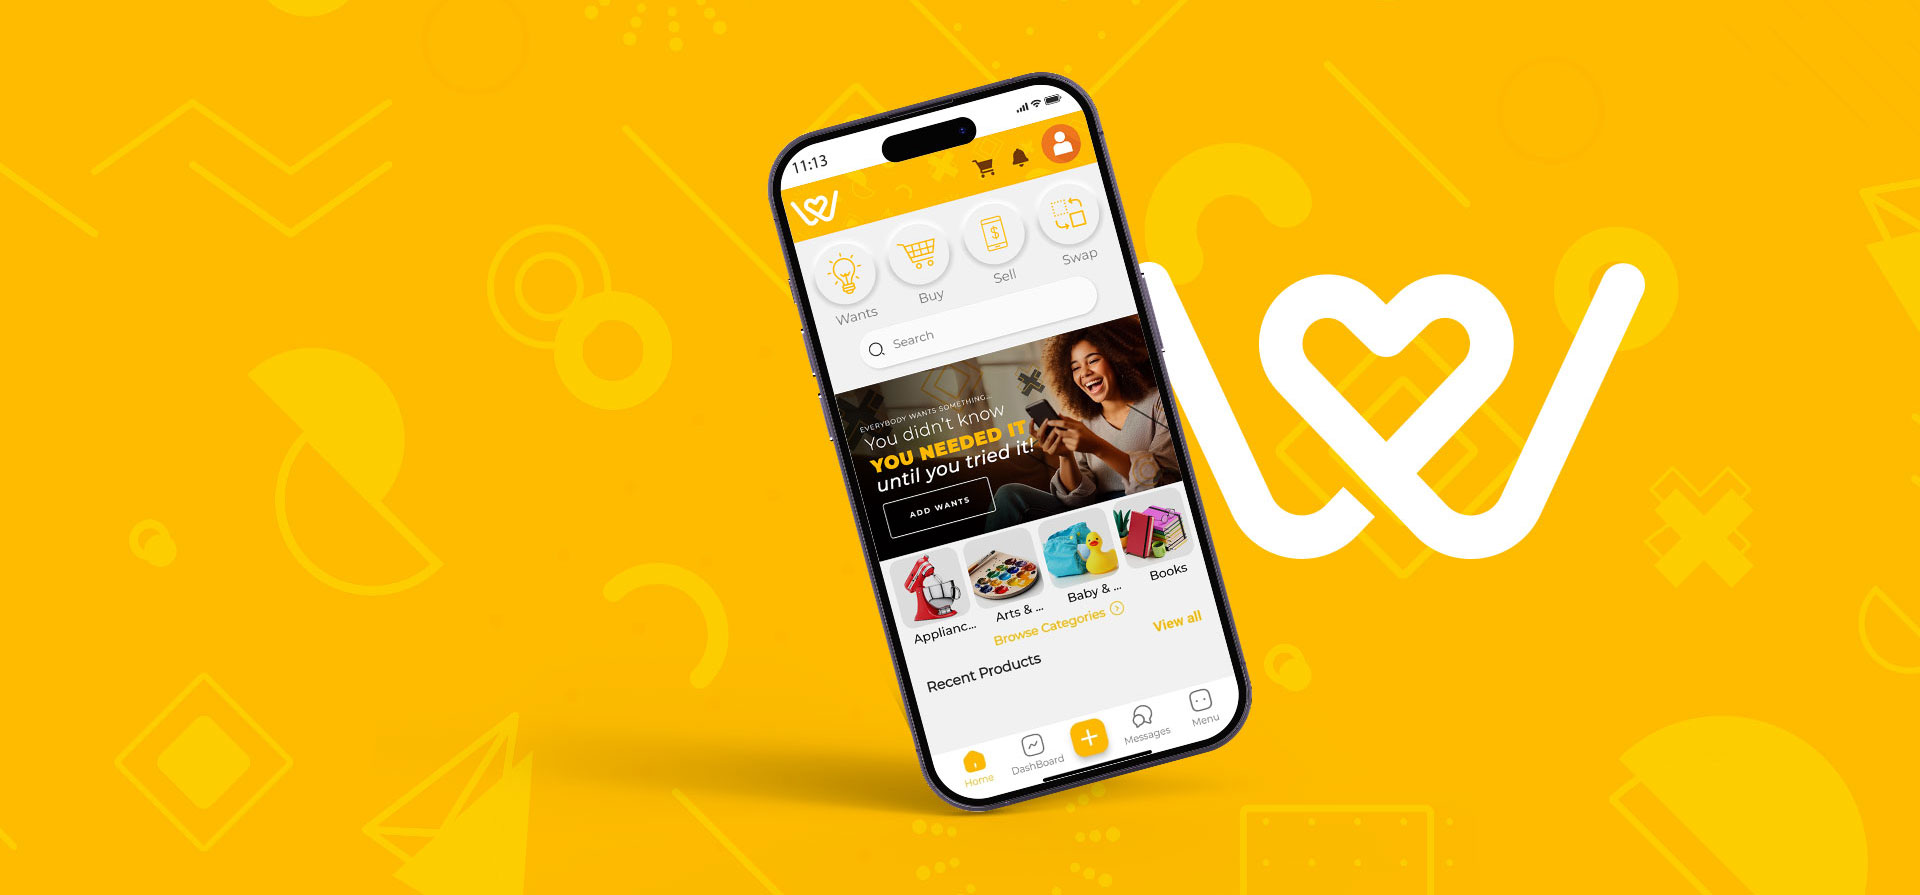 All I Want App Preview displayed on a smartphone over a fun yellow background with W logo